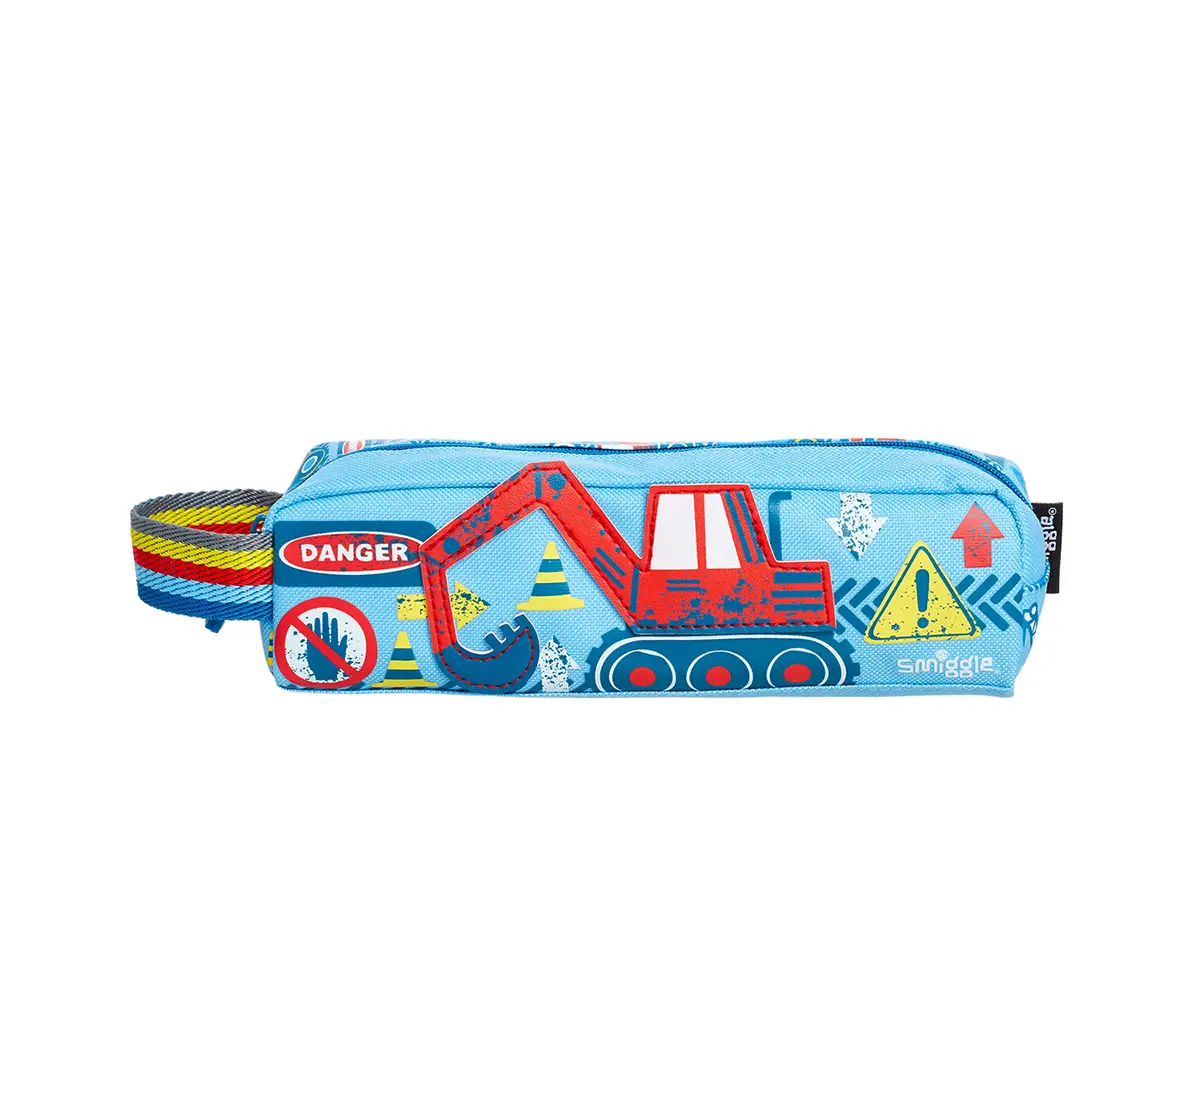  Smiggle Topsy Teeny Tiny Pencil Case - Car Print Bags for Kids age 3Y+ (Blue)